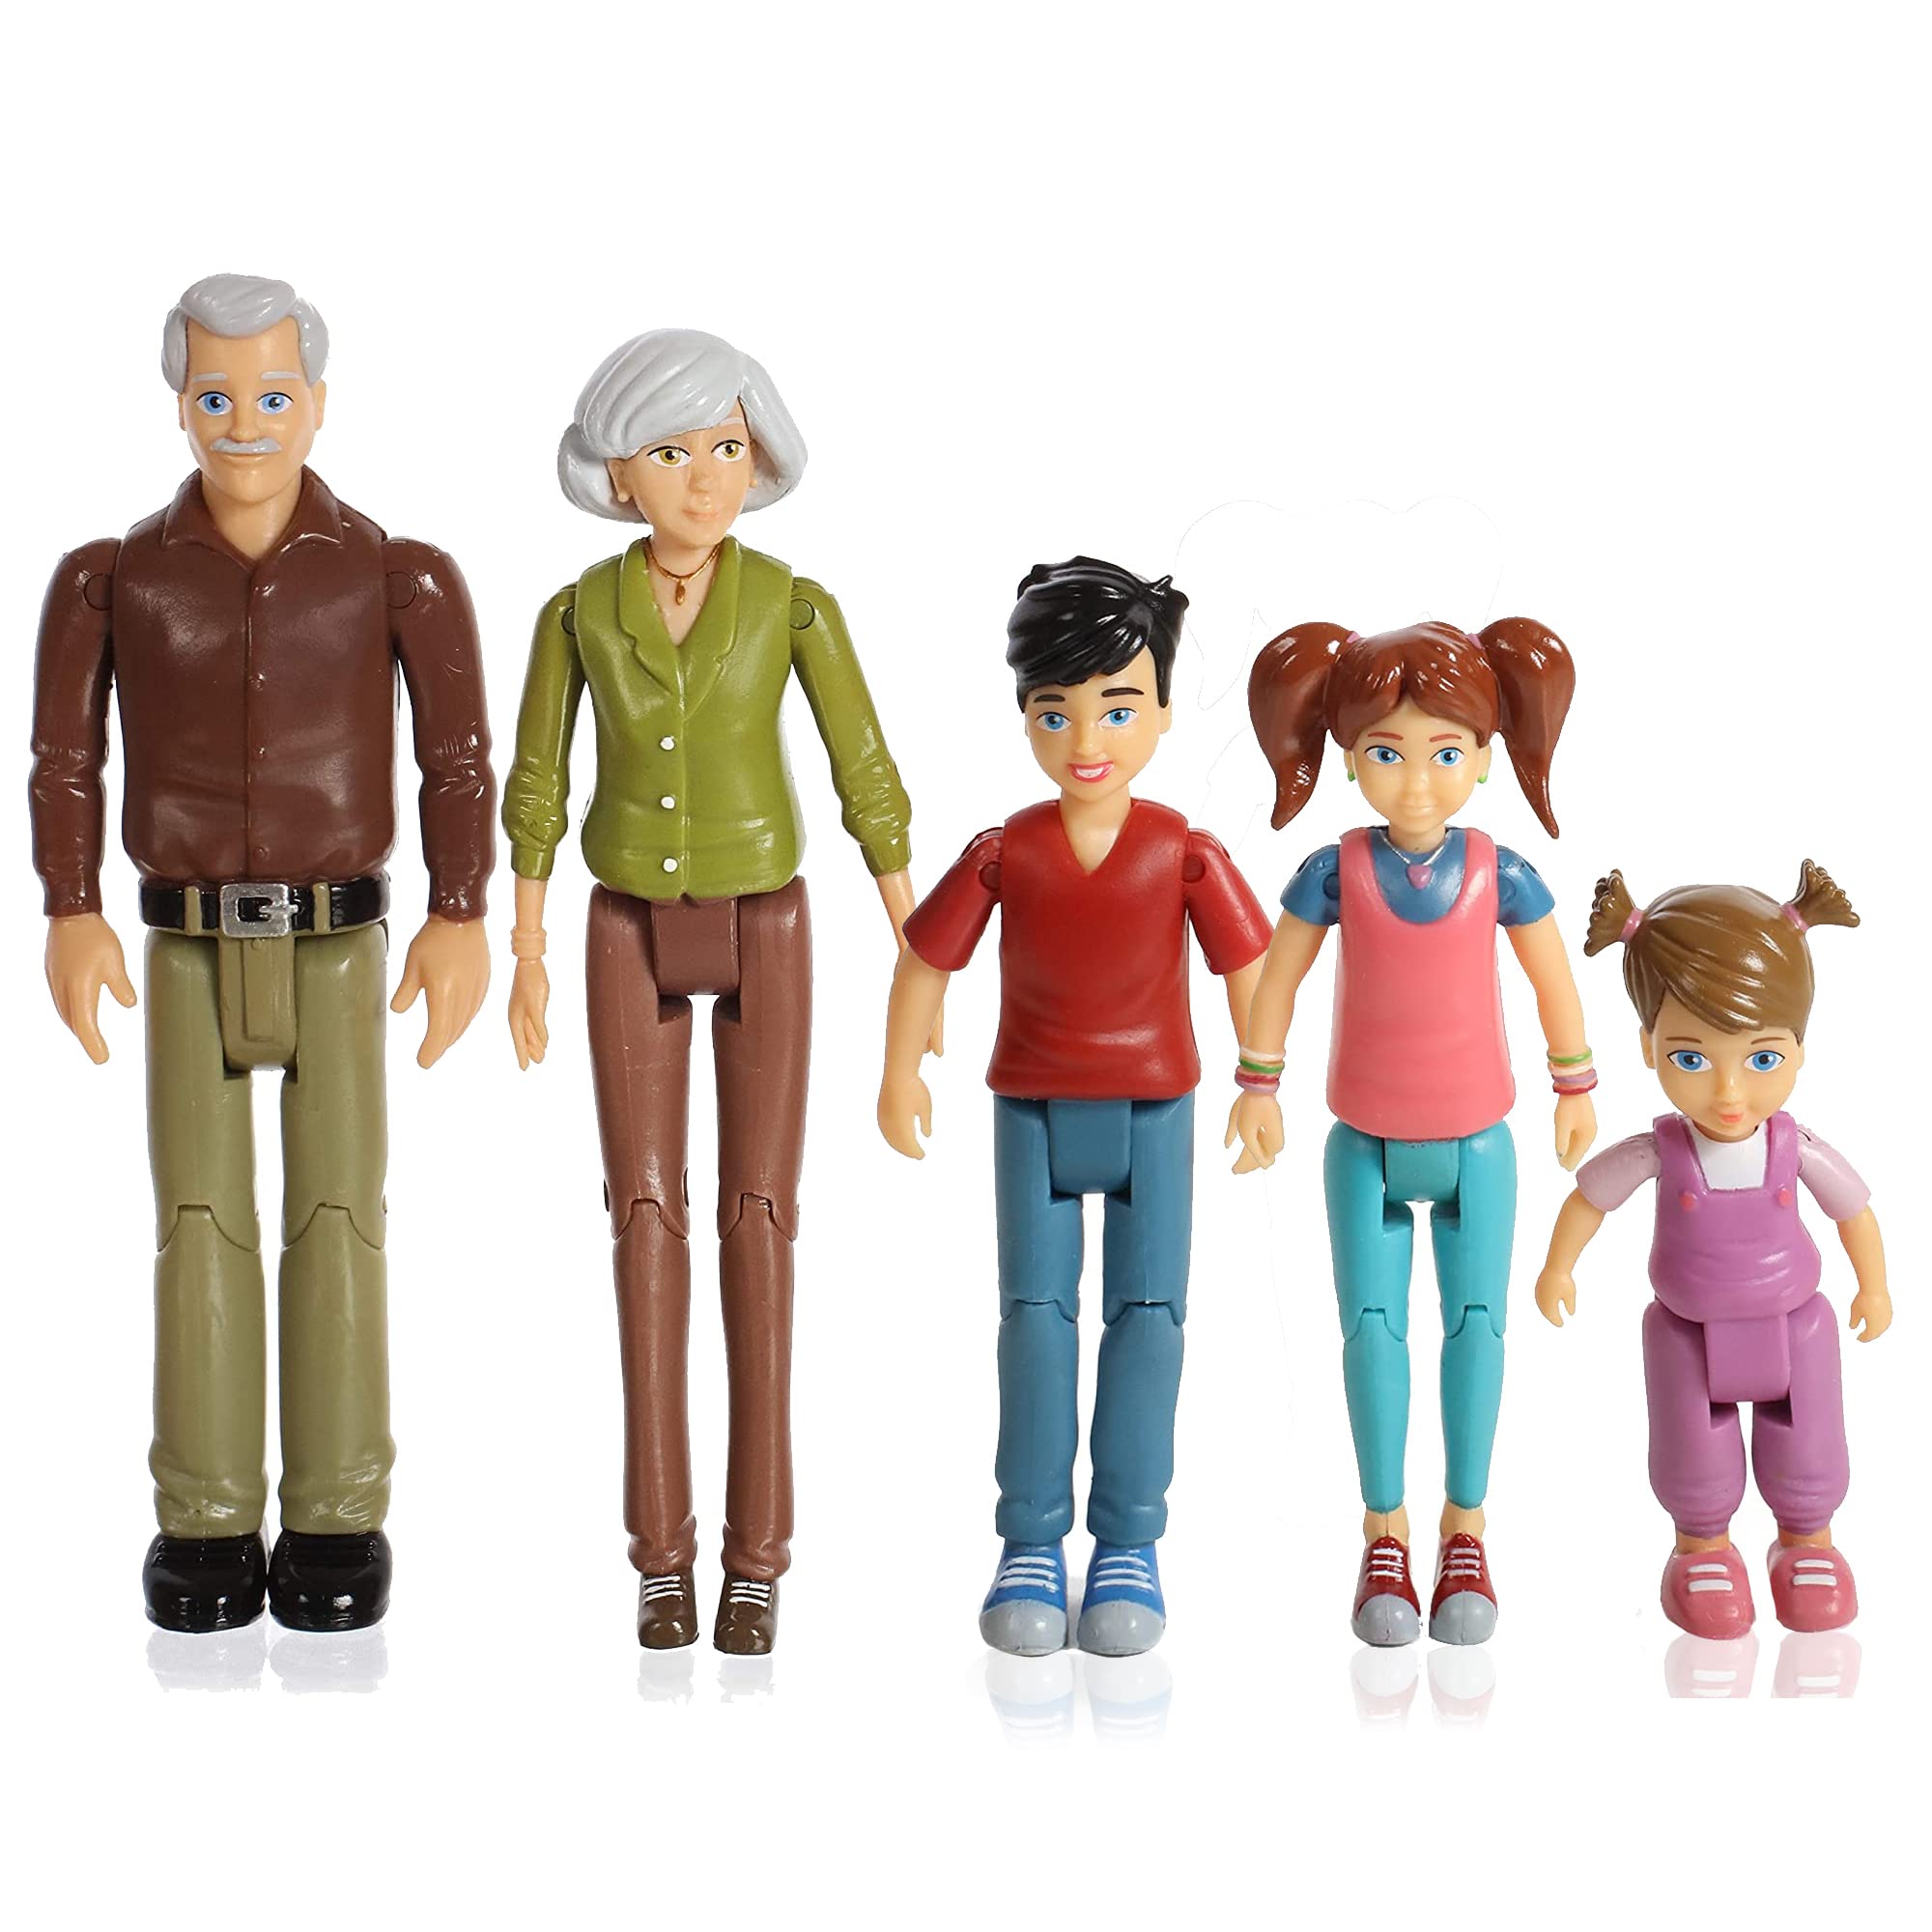 Beverly Hills Doll Collection Sweet Li'l Family Dollhouse People Set of 5 Dollhouse Figures - Including Boy Girl Toddler Grandma and Grandpa - Poseable Dollhouse Dolls Bundle